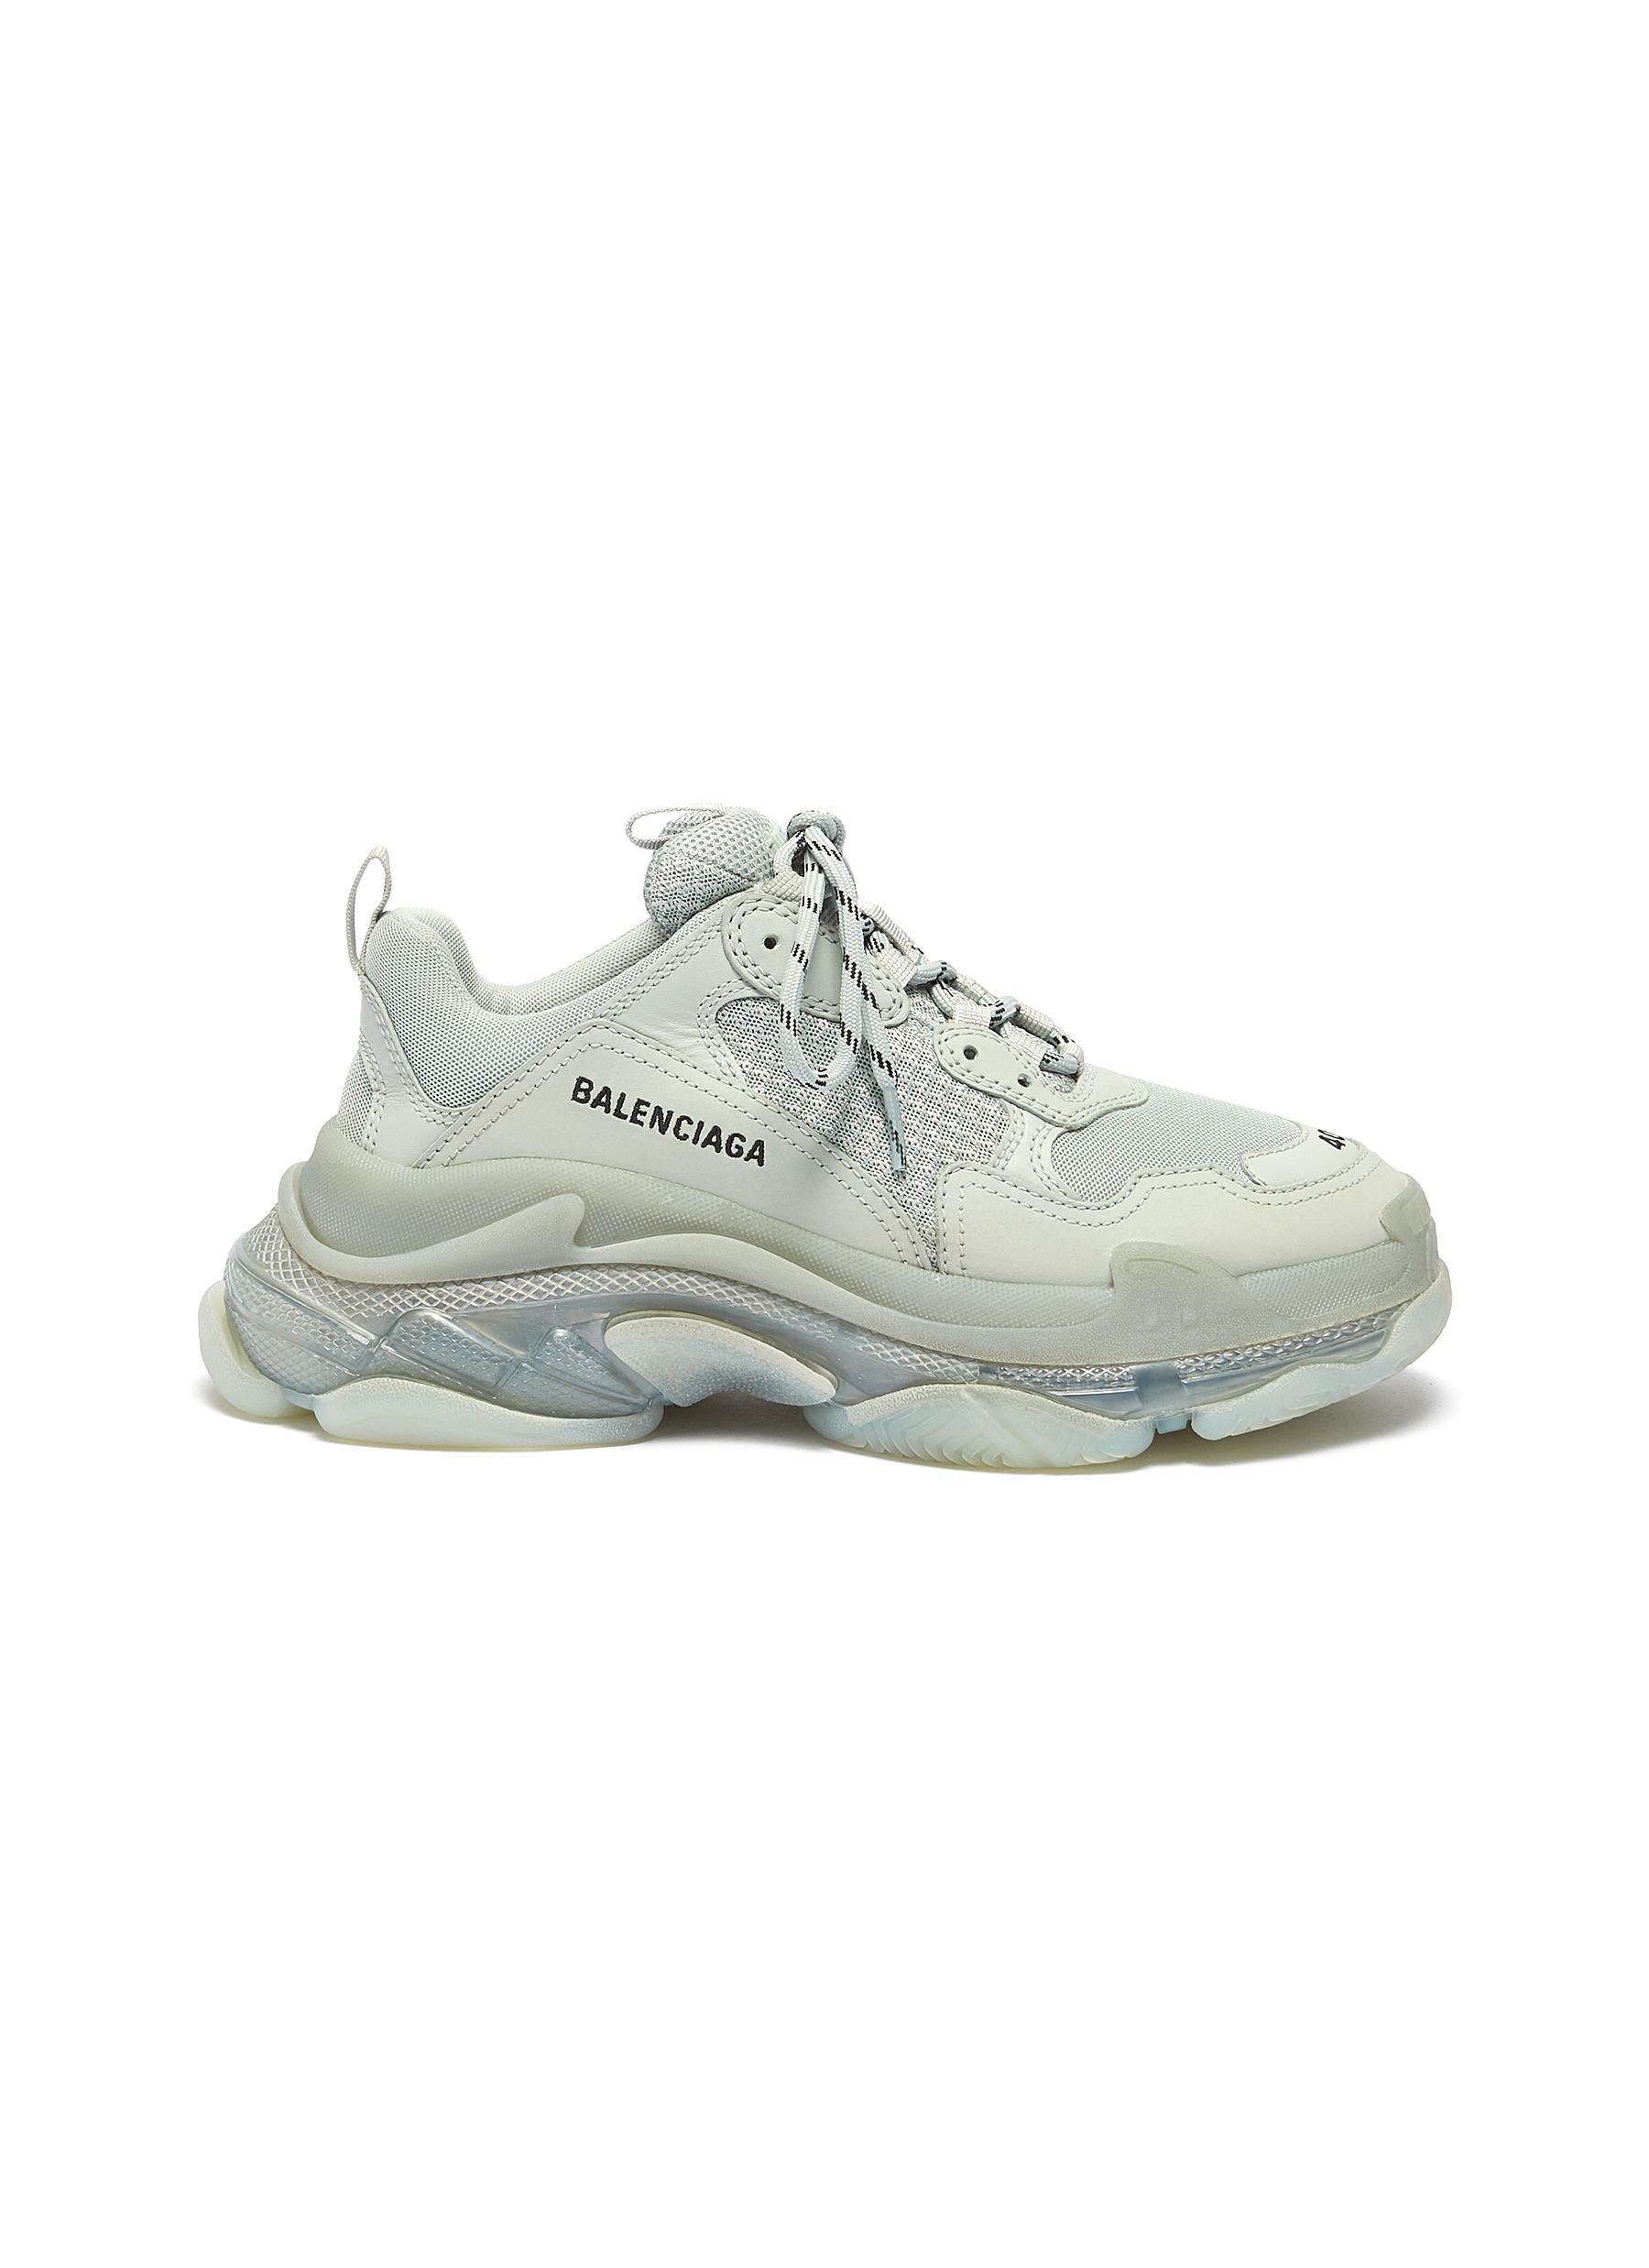 Balenciaga Triple S Clear Sole Trainers in Gray | Lyst